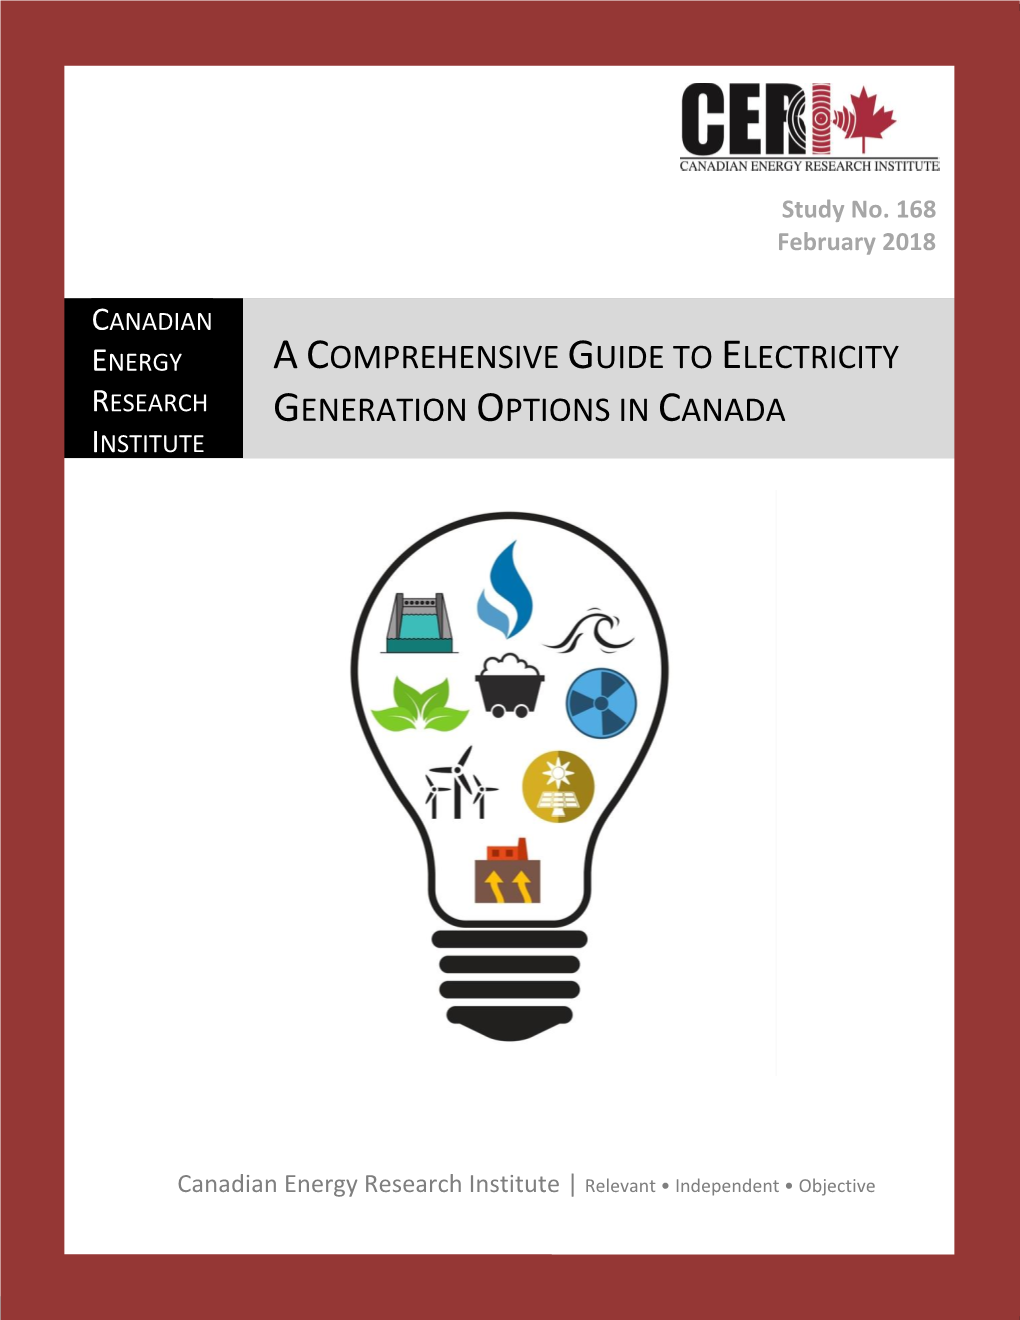 Acomprehensive Guide to Electricity